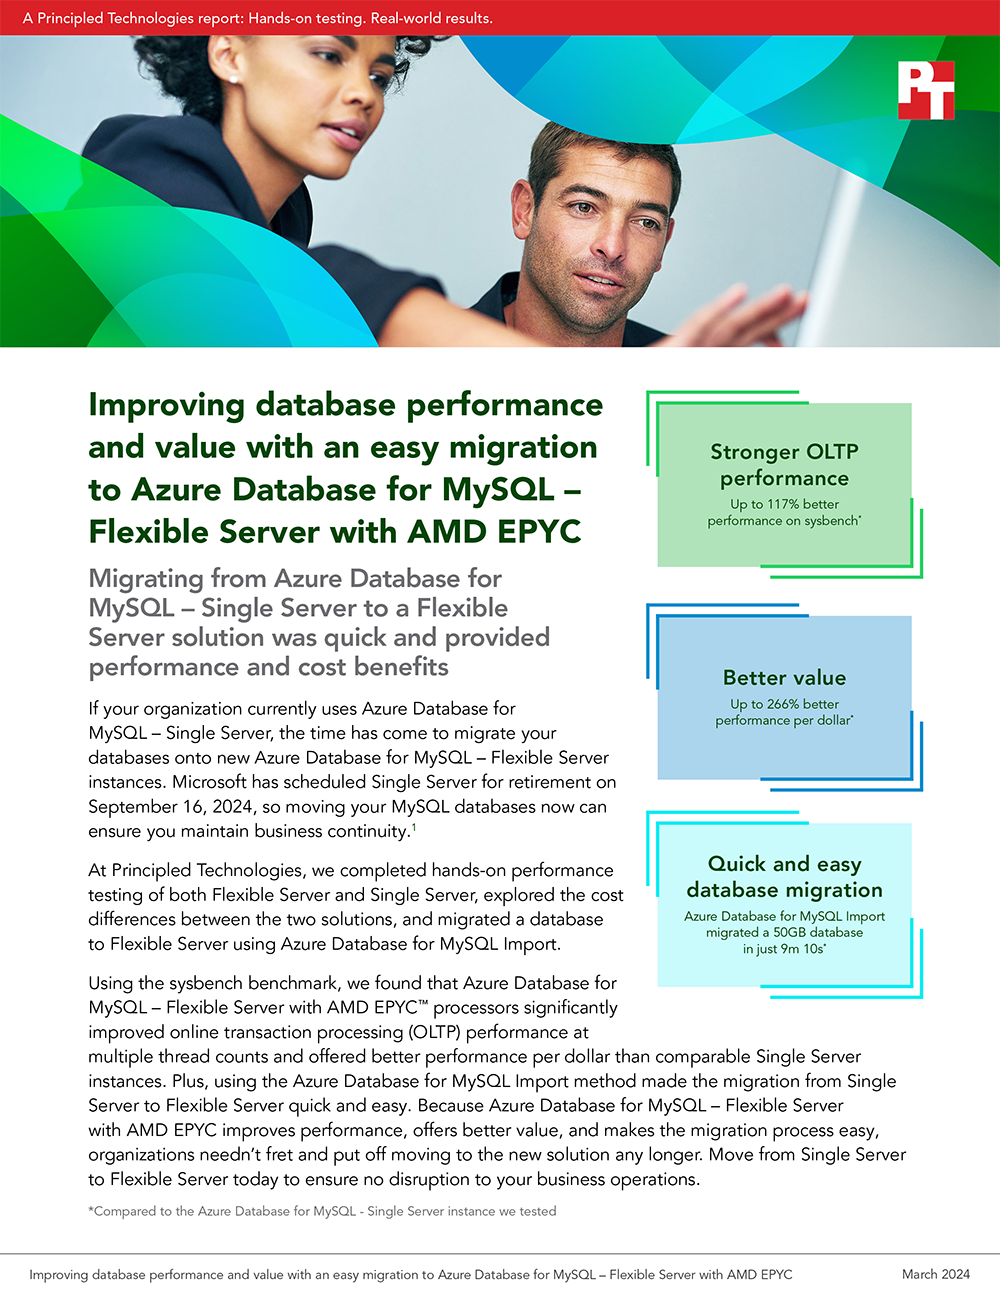 Improving database performance and value with an easy migration to Azure Database for MySQL – Flexible Server with AMD EPYC